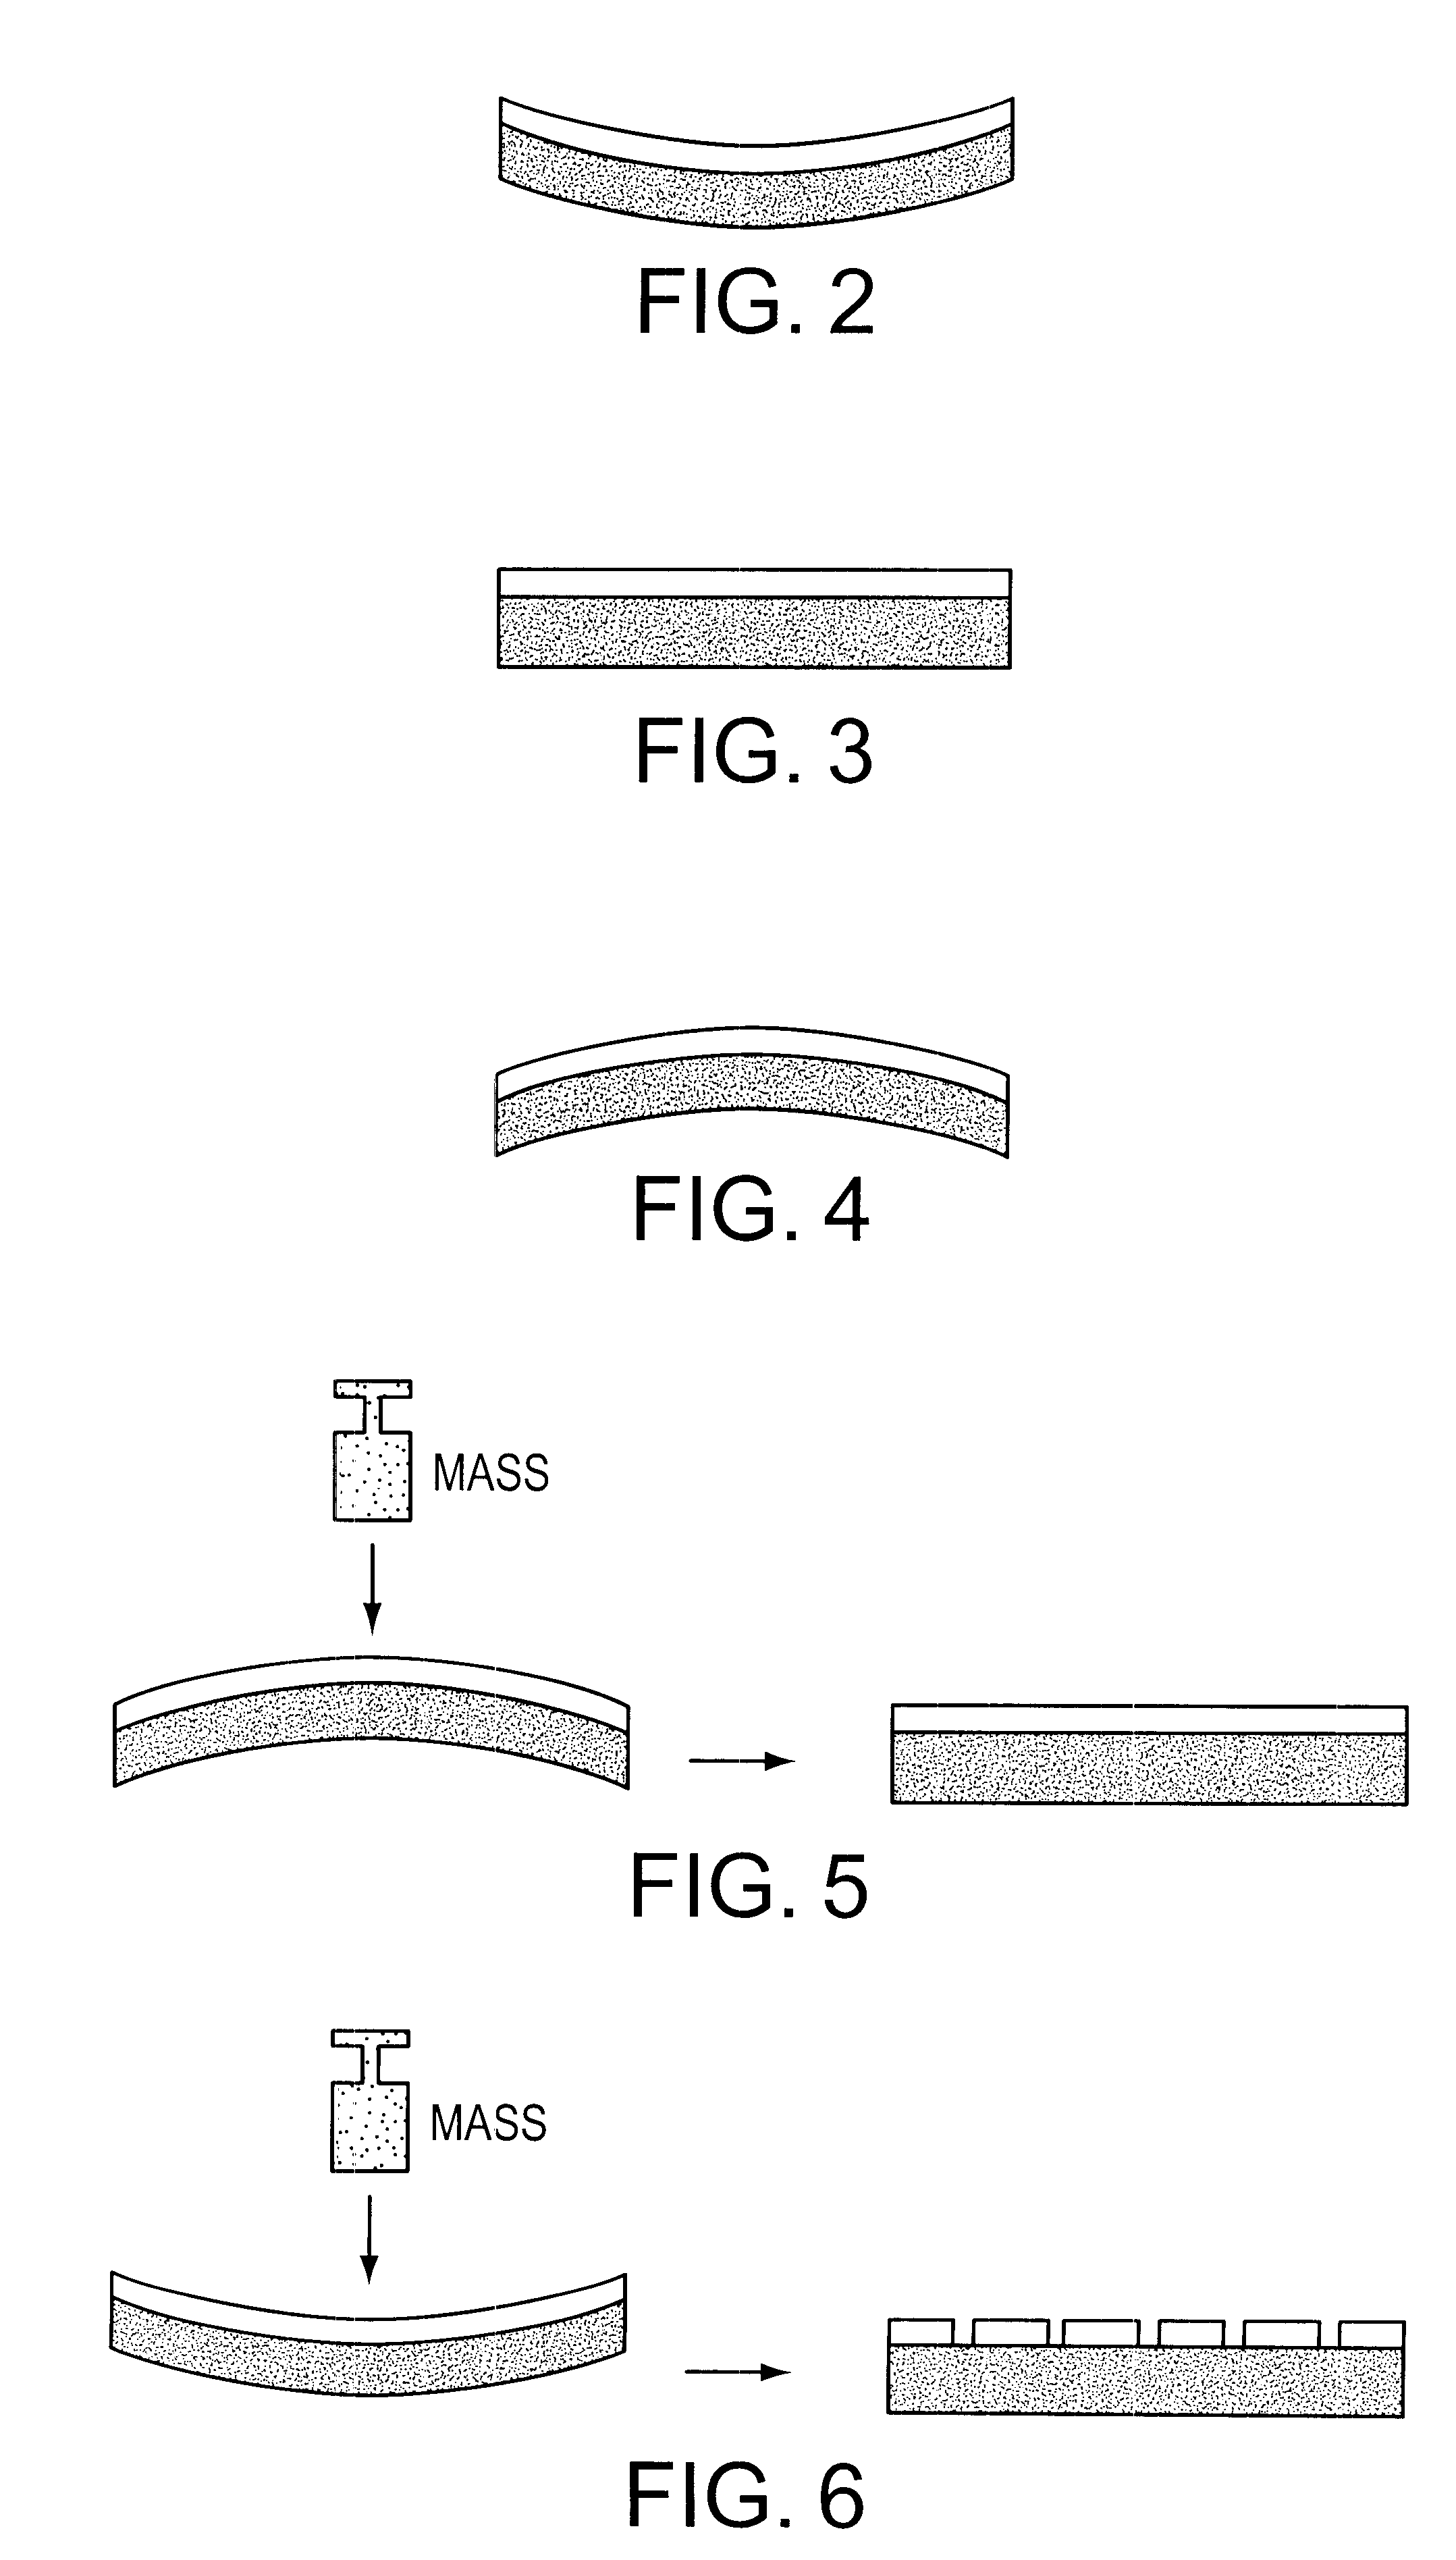 Method for making thin, flat, dense membranes on porous substrates